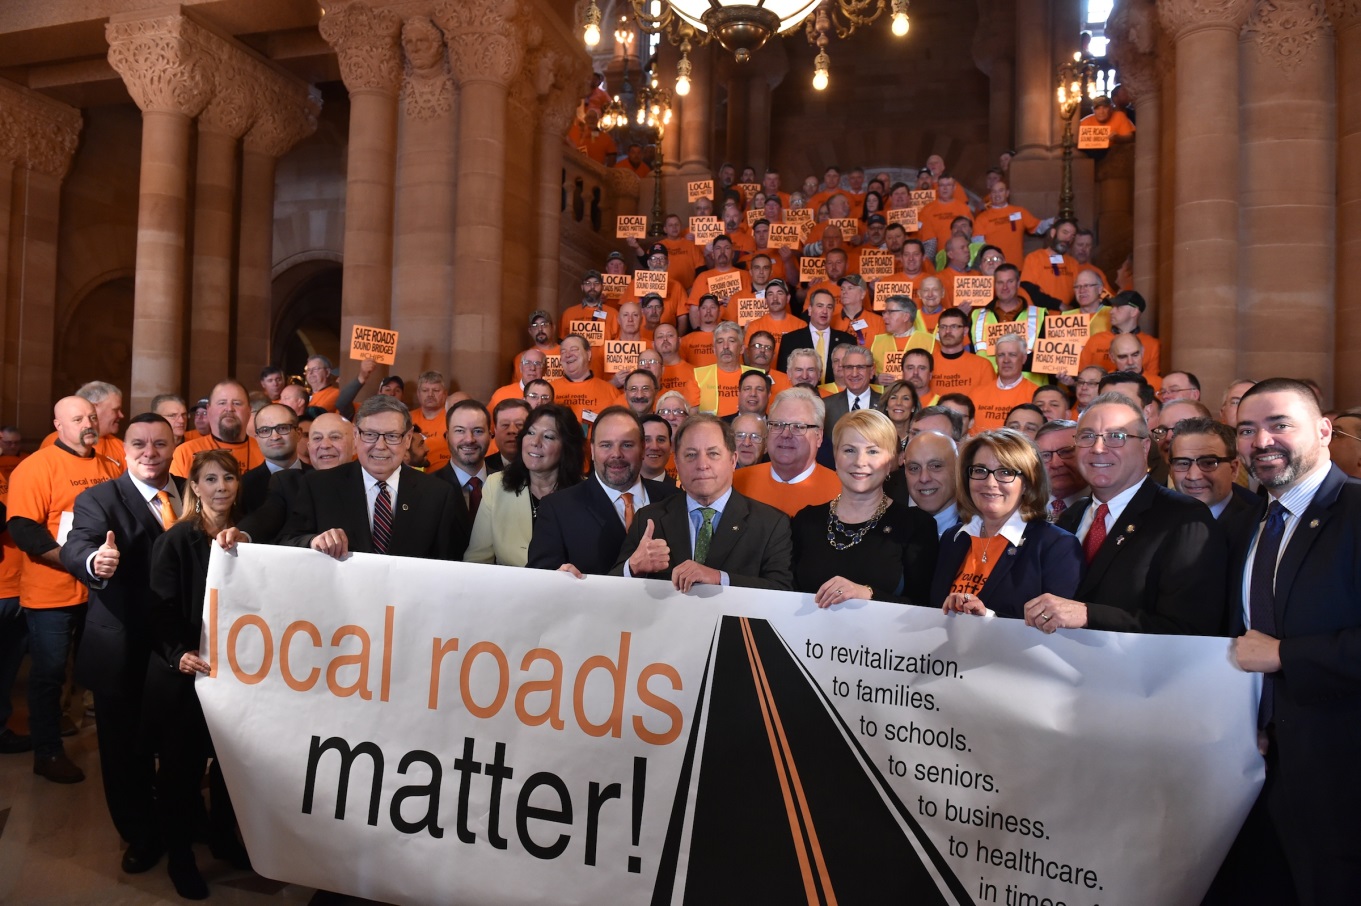 Assemblywoman Mary Beth Walsh (R,C,I-Ballston) pictured at CHIPS rally with members of the Assembly Minority Conference on March 4, 2020 in Albany.